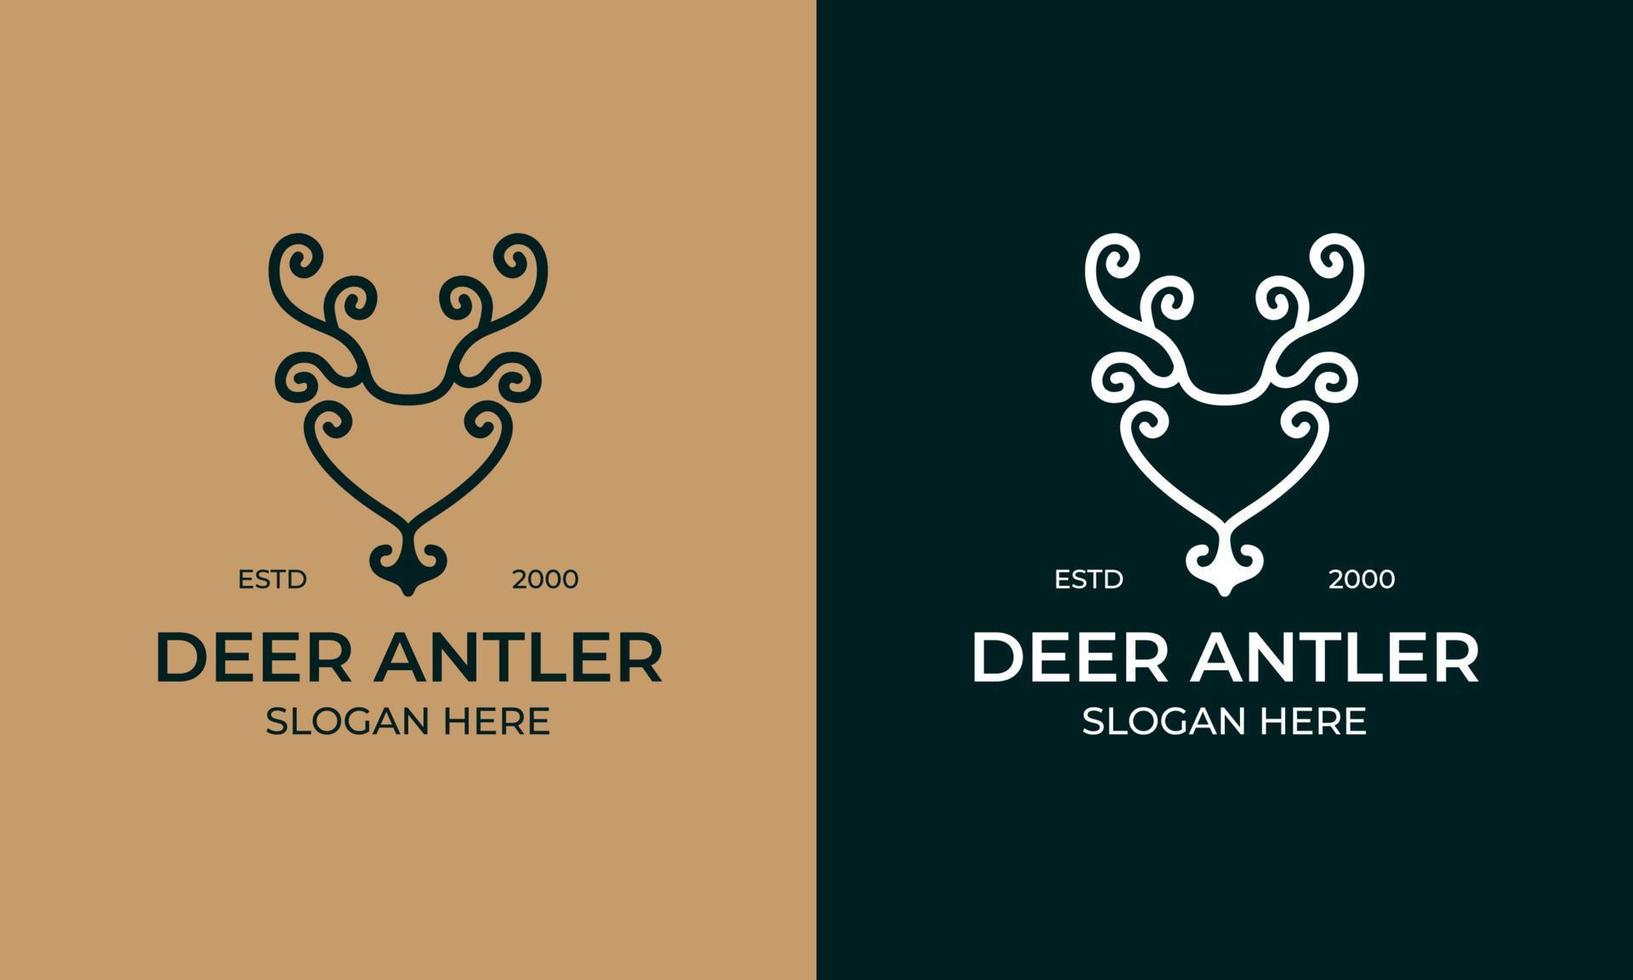 Deer antler logo design and icon inspiration, deer head with anchor illustration in ethnic style vector